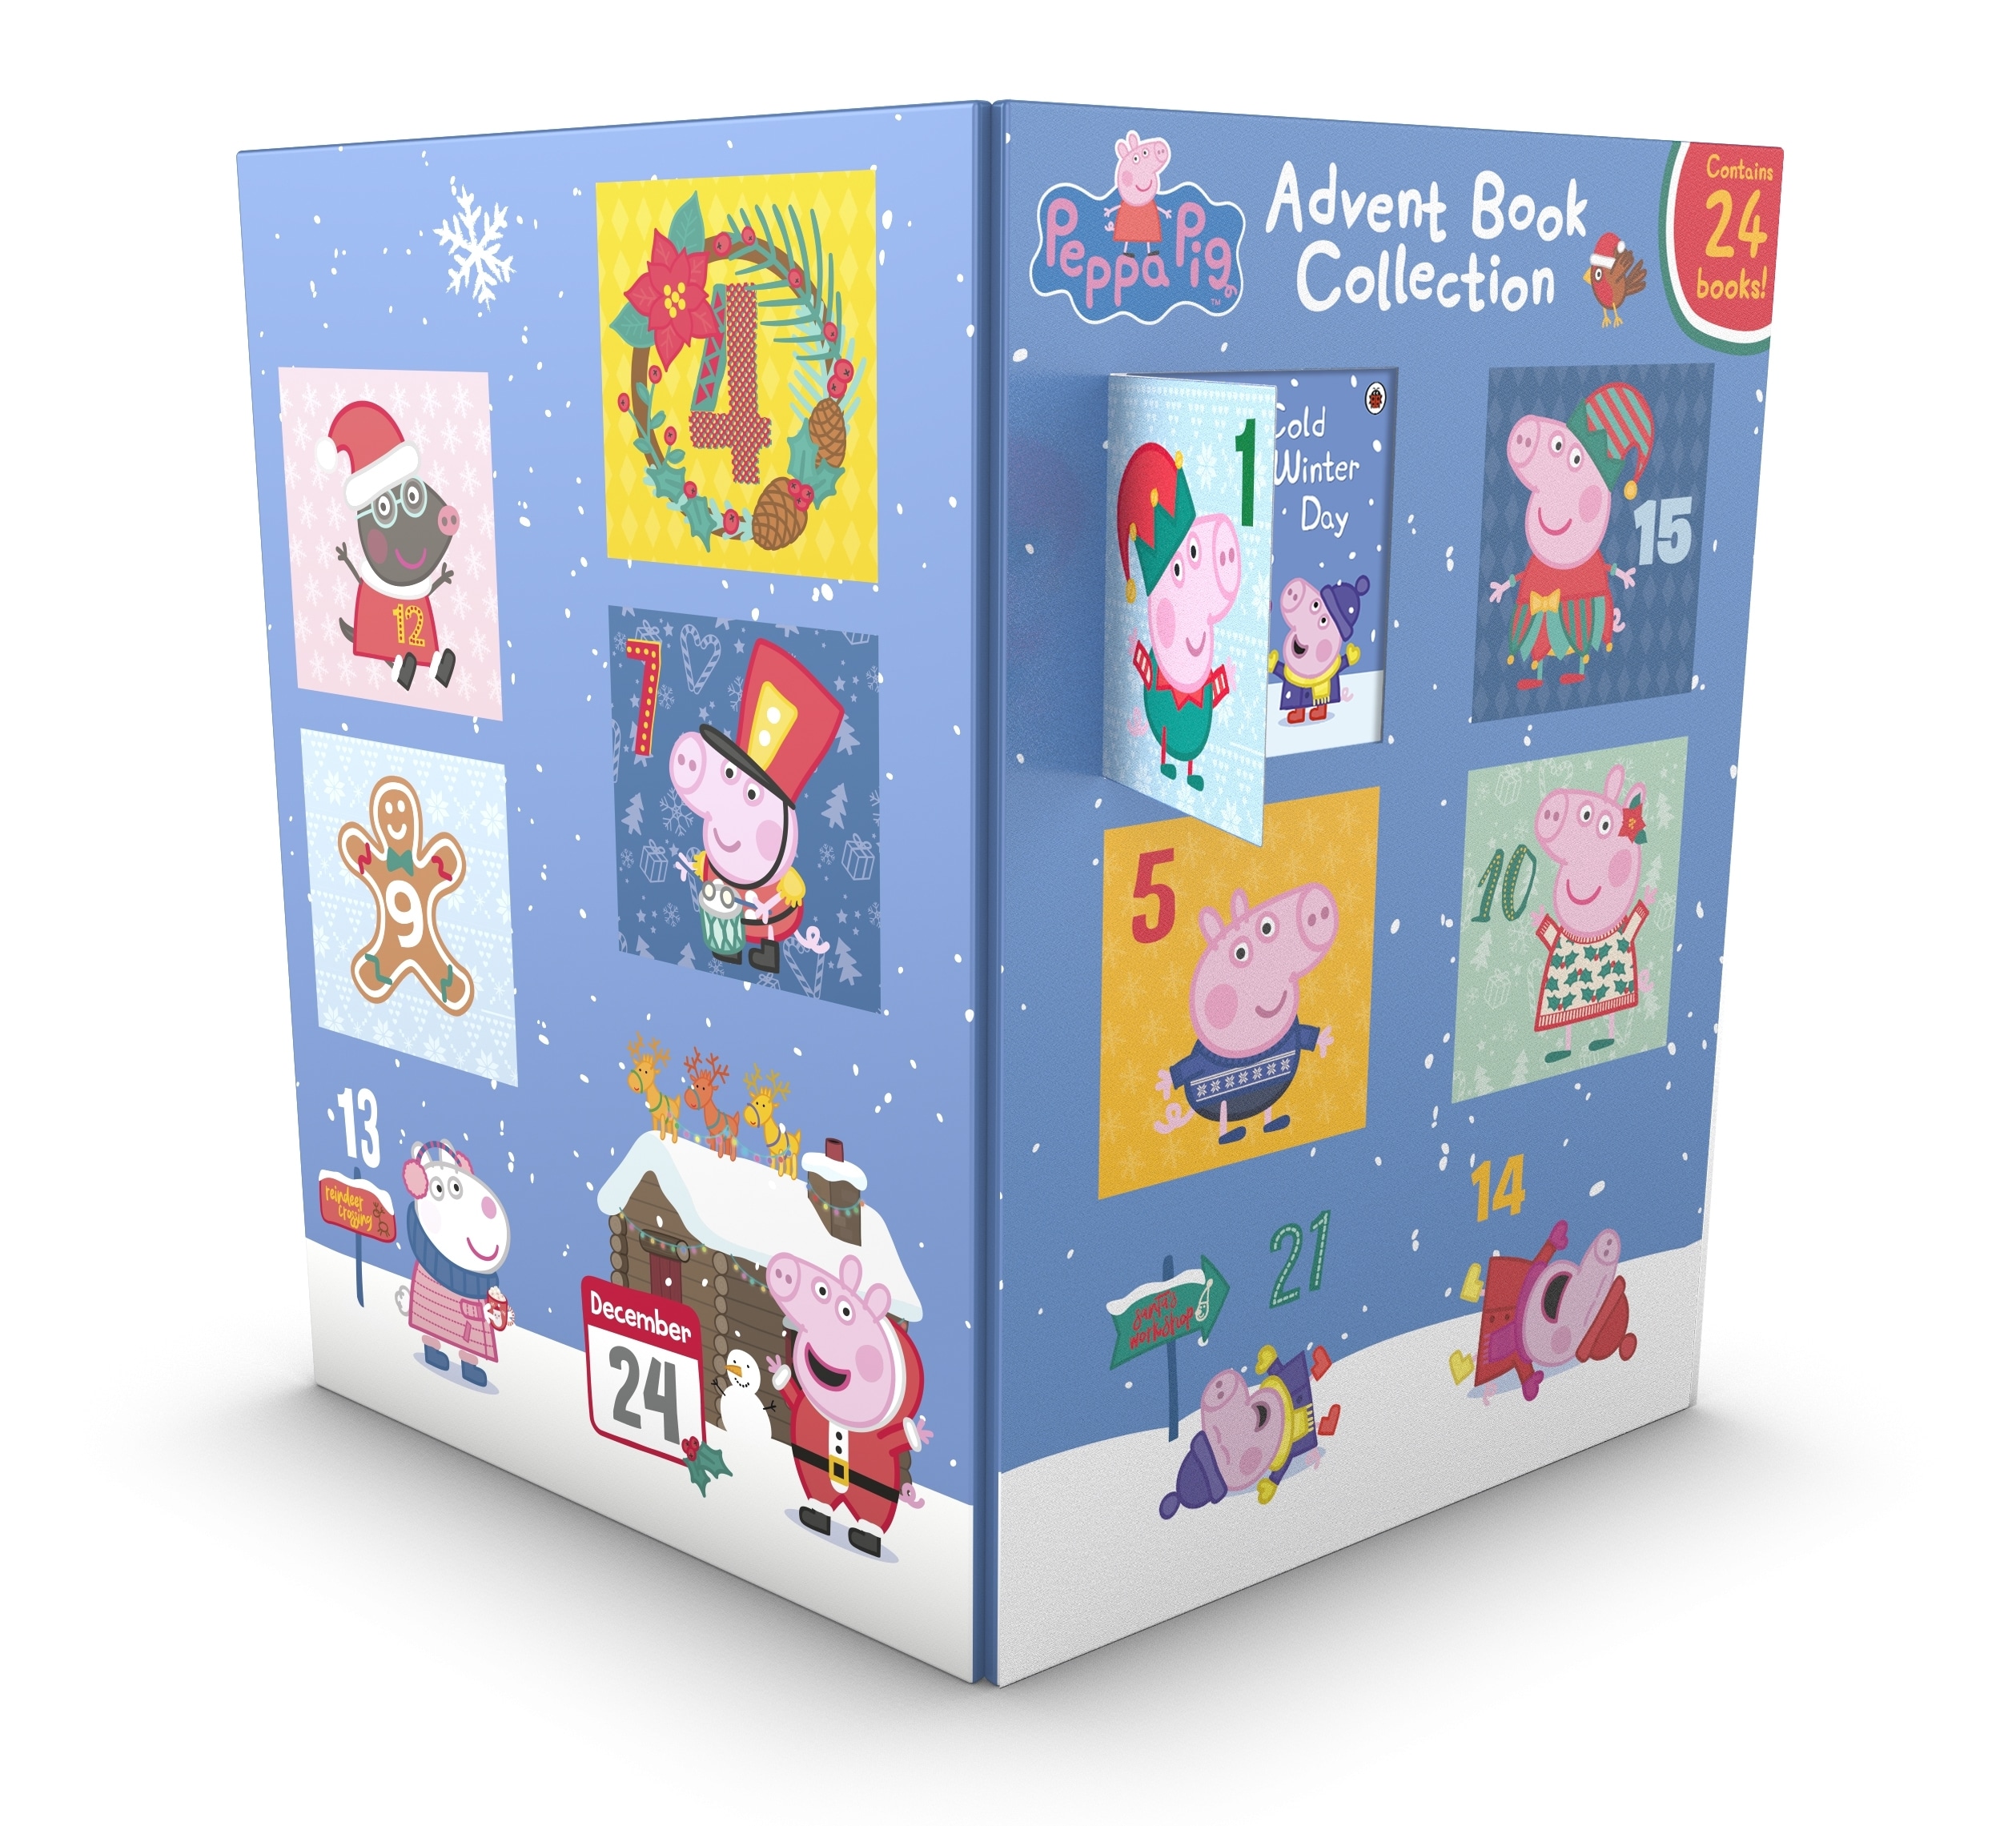 Book “Peppa Pig: Advent Book Collection” by Peppa Pig — October 1, 2020